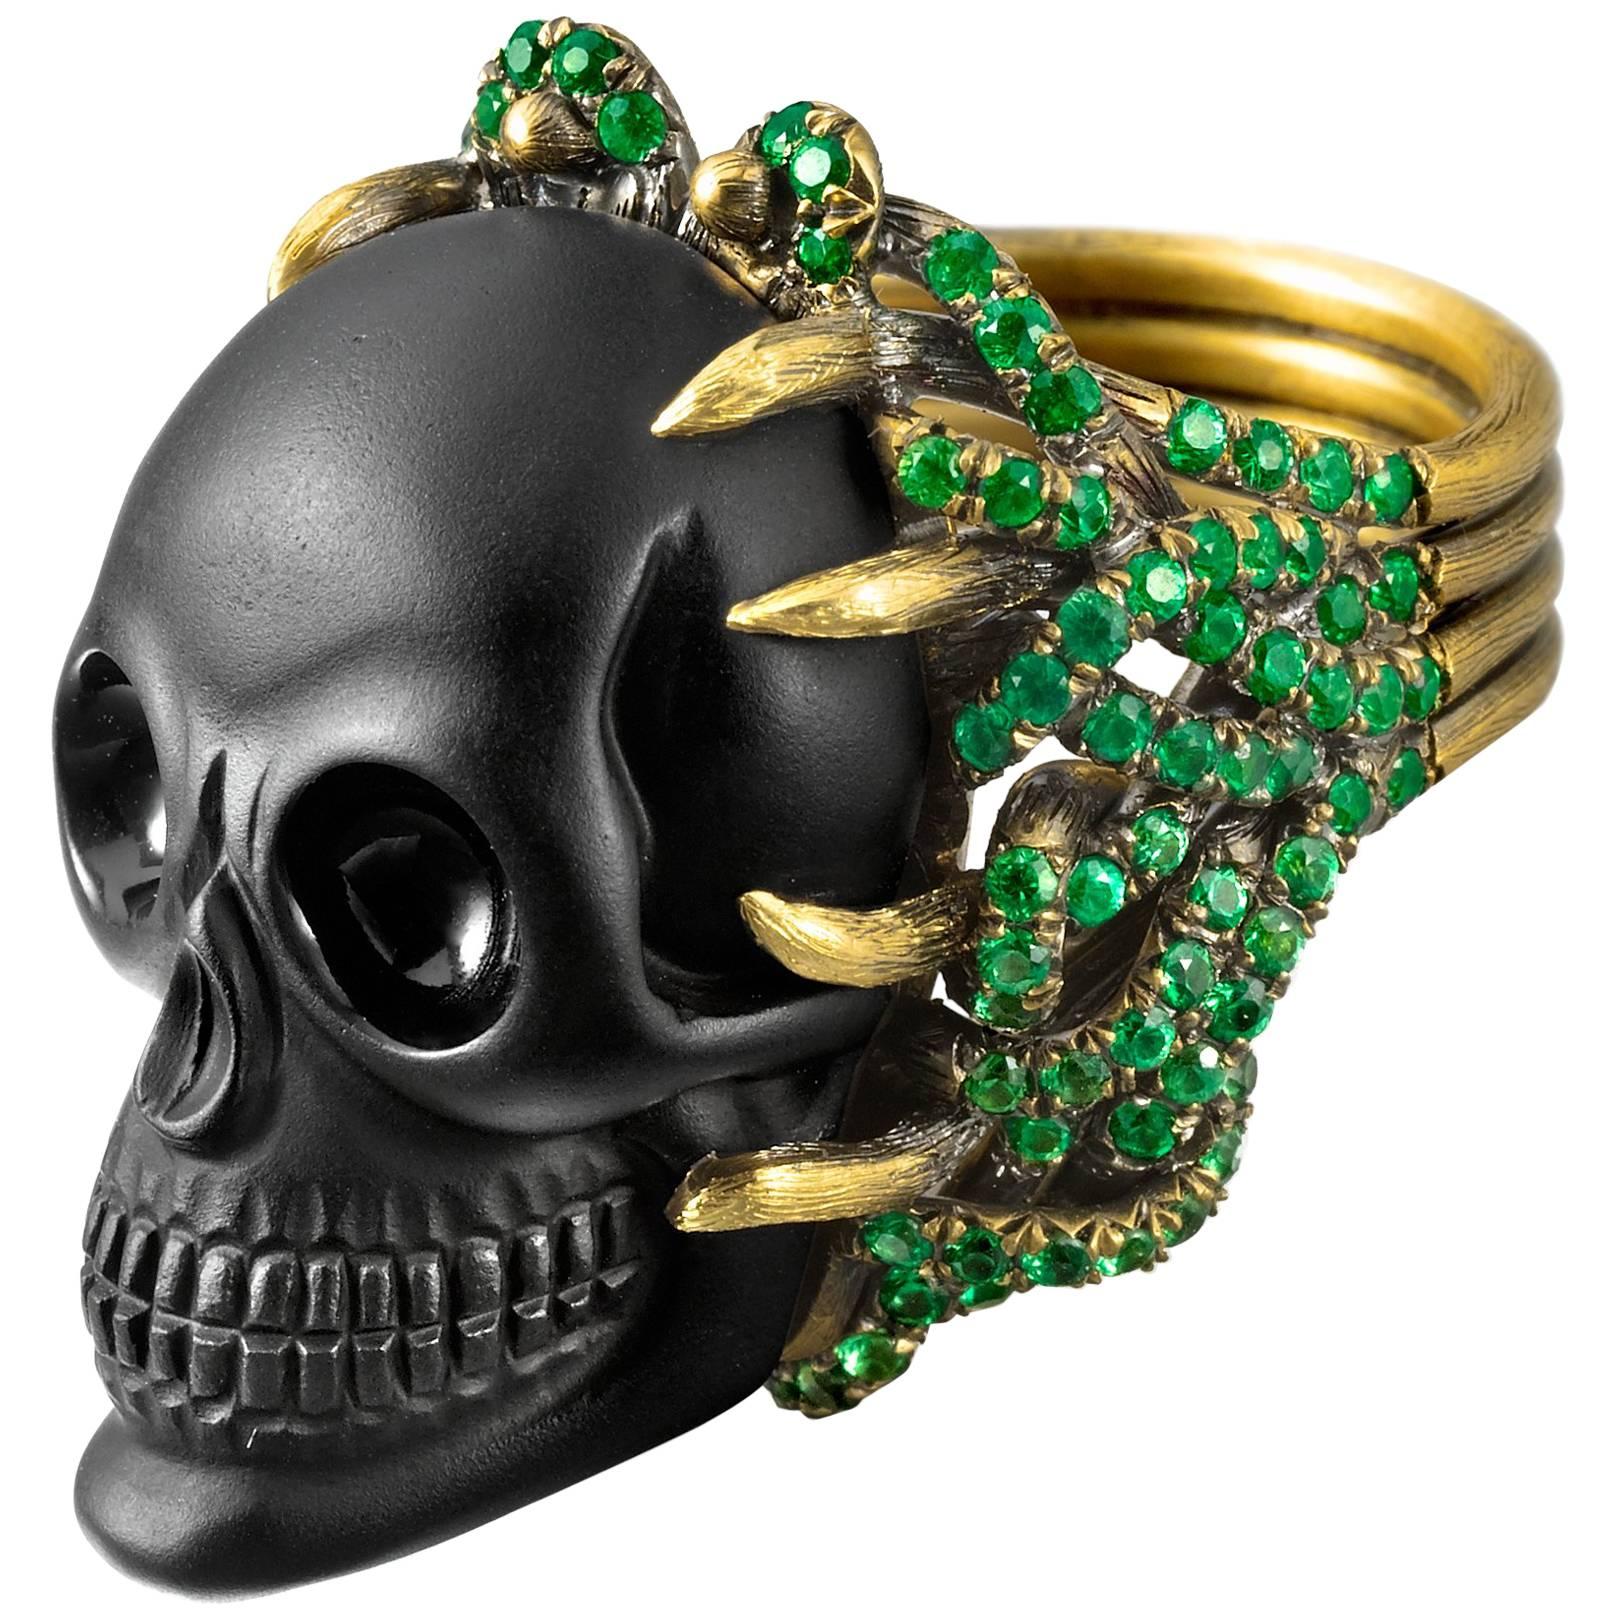 Wendy Brandes Onyx Skull Ring With Green Garnets and Hidden Diamonds